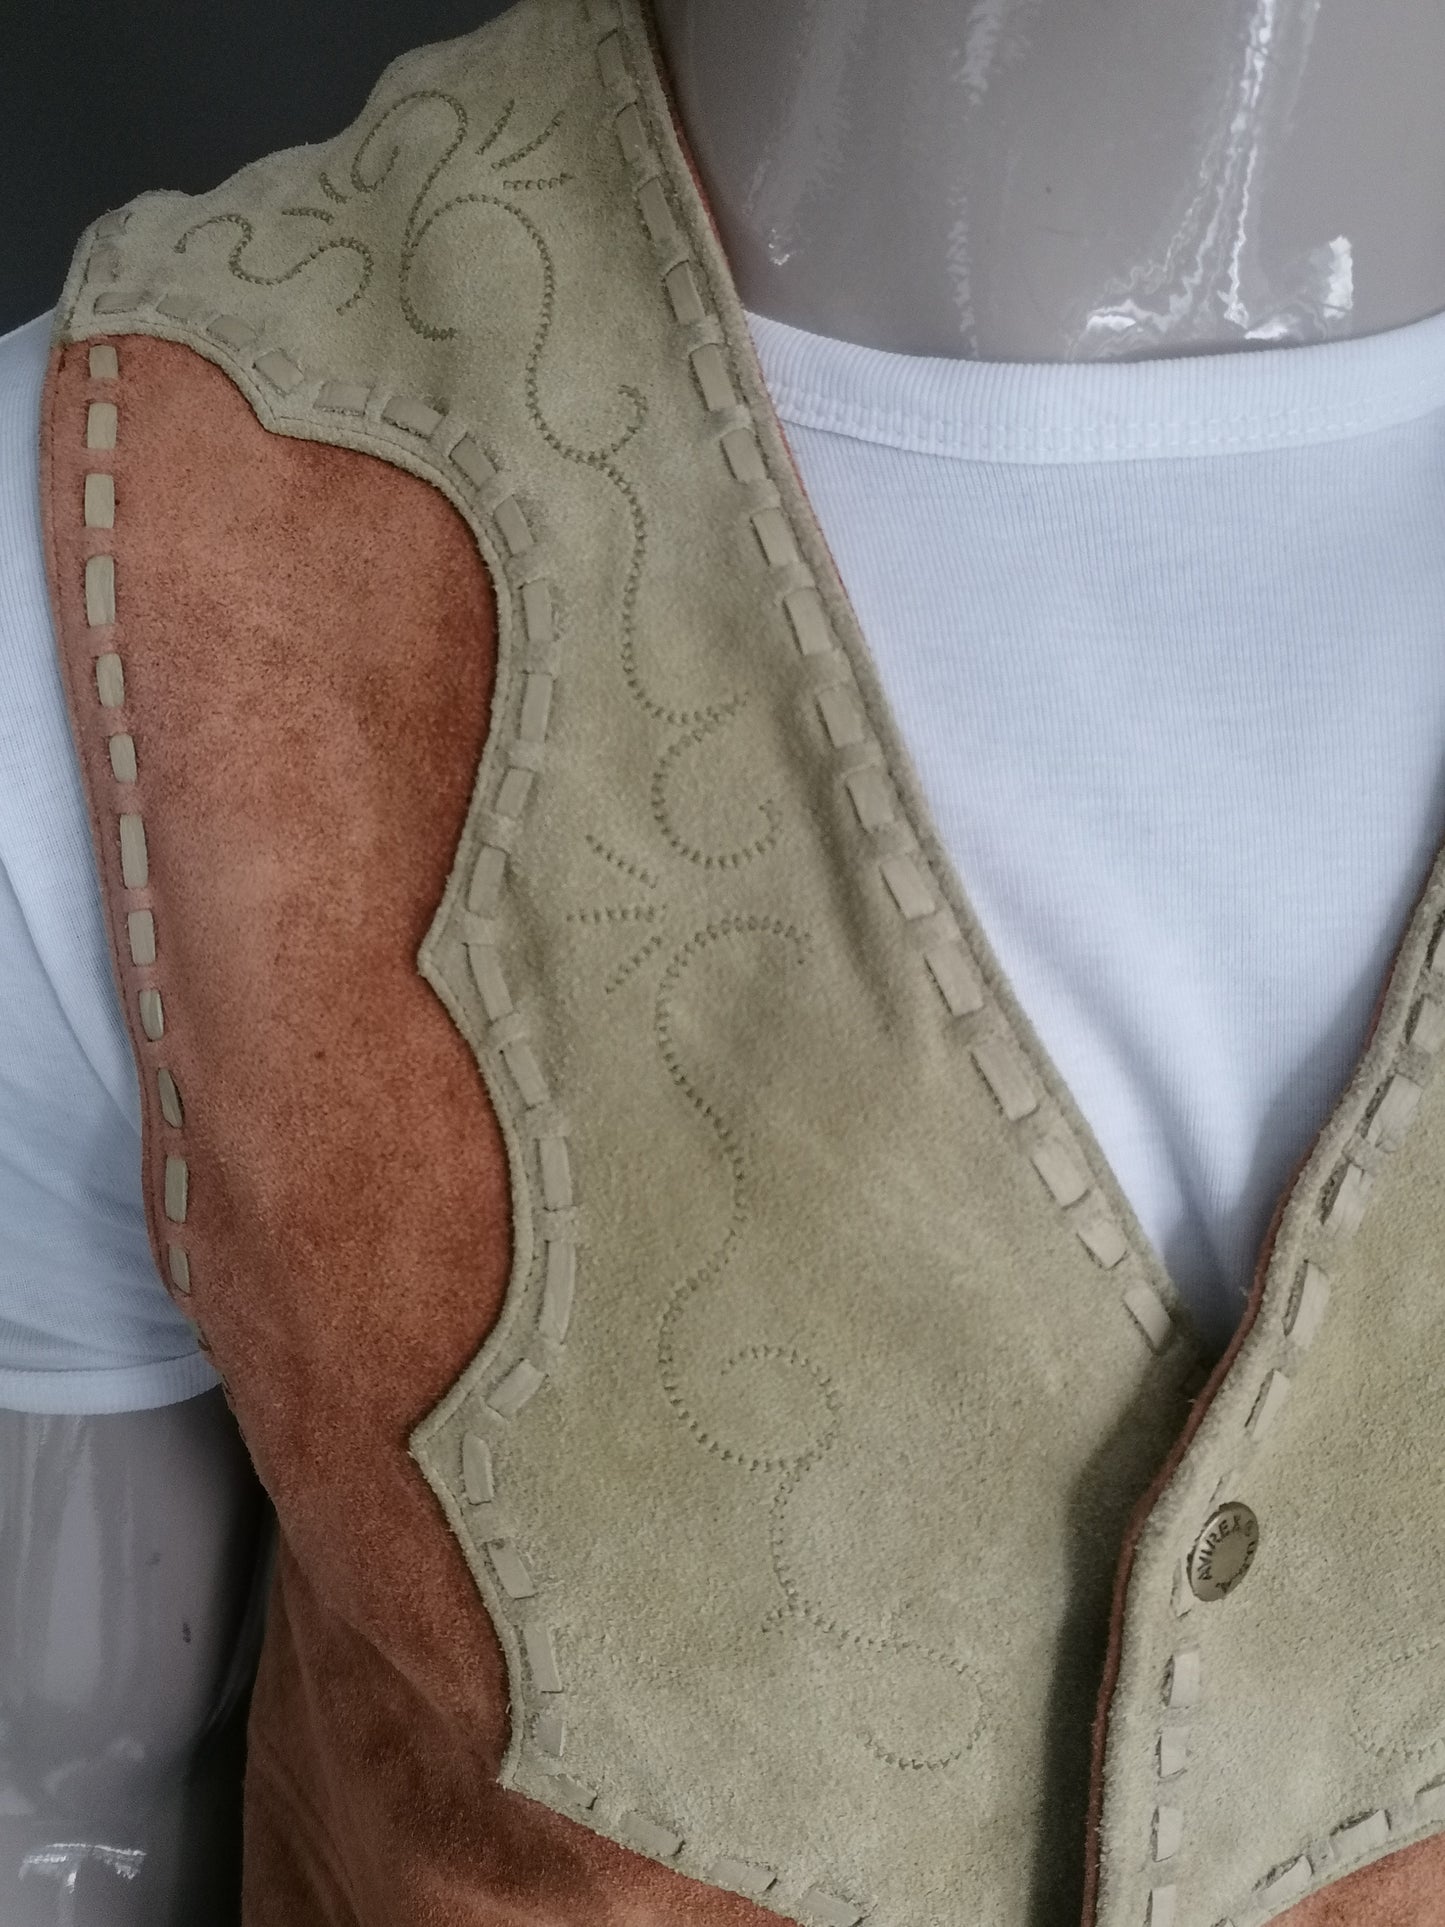 Avirex suede leather waistcoat with press studs. Brown beige thick leather with stitched accent. Size M.